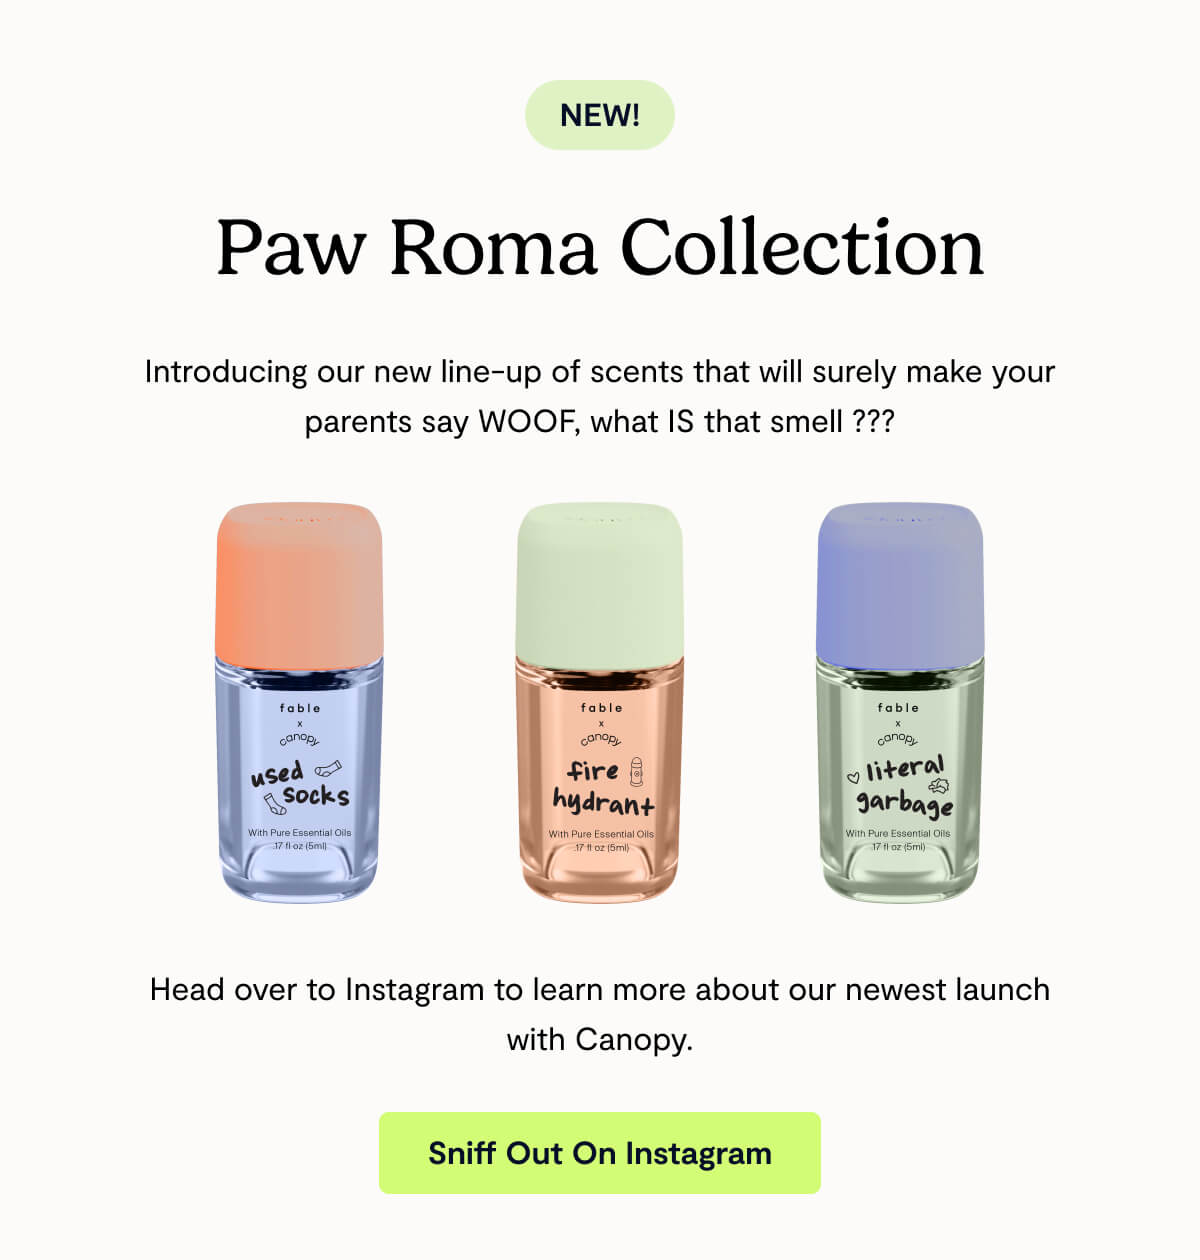 Introducing our new line-up of scents that will surely make your parents say WOOF, what IS that smell ??? Head over to Instagram to learn more about our newest launch with Canopy.